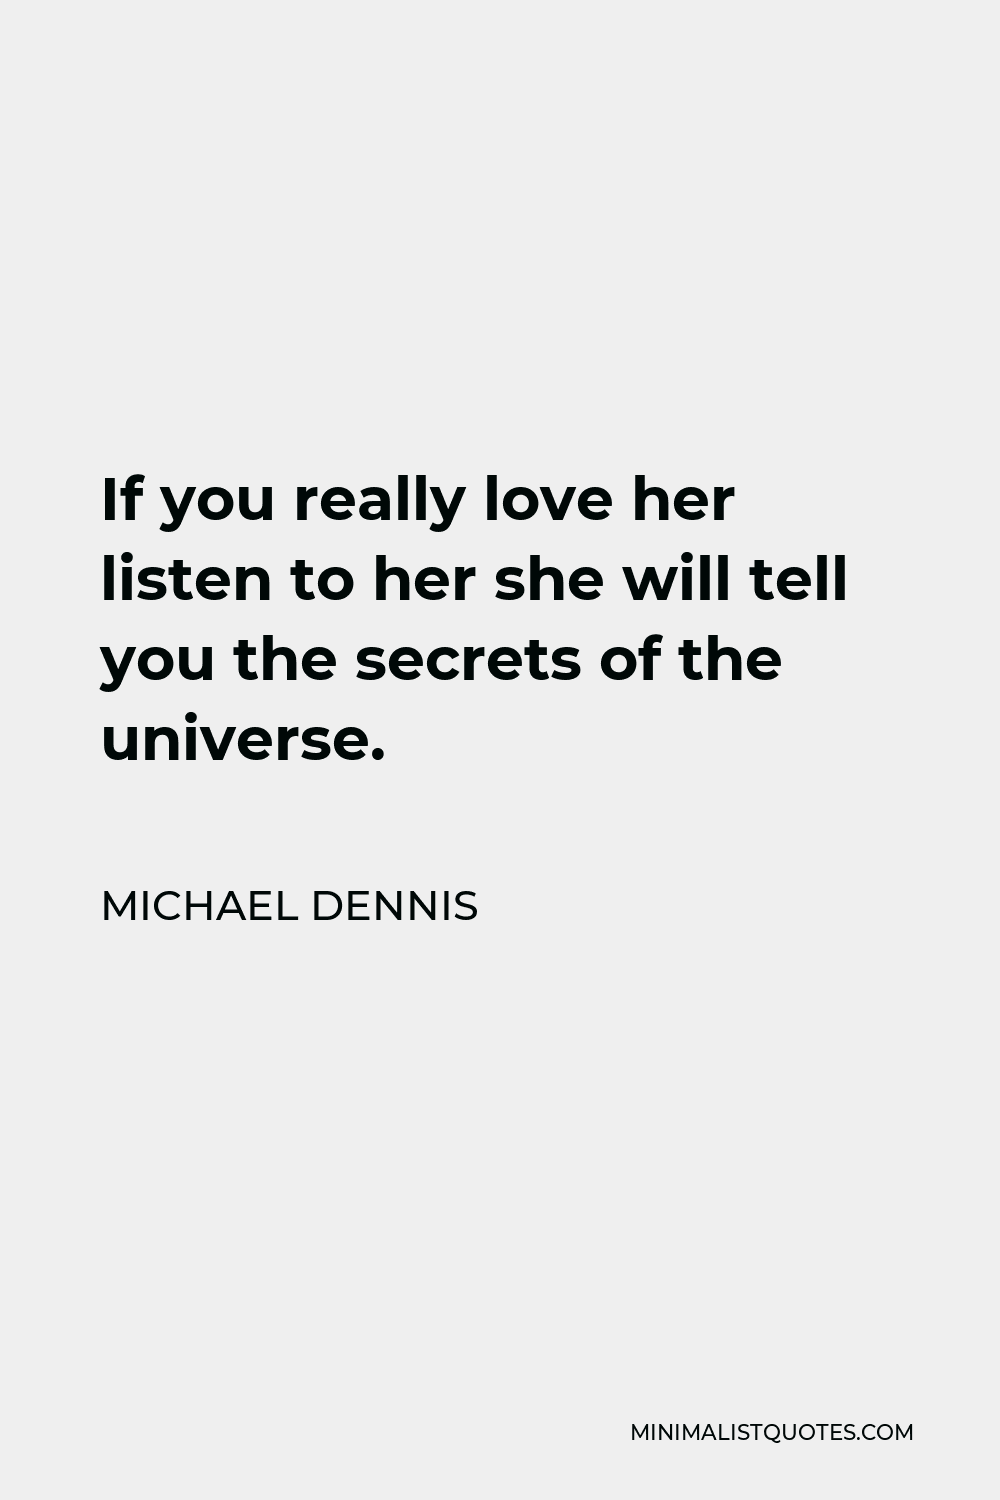 Michael Dennis Quote - If you really love her listen to her she will tell you the secrets of the universe.